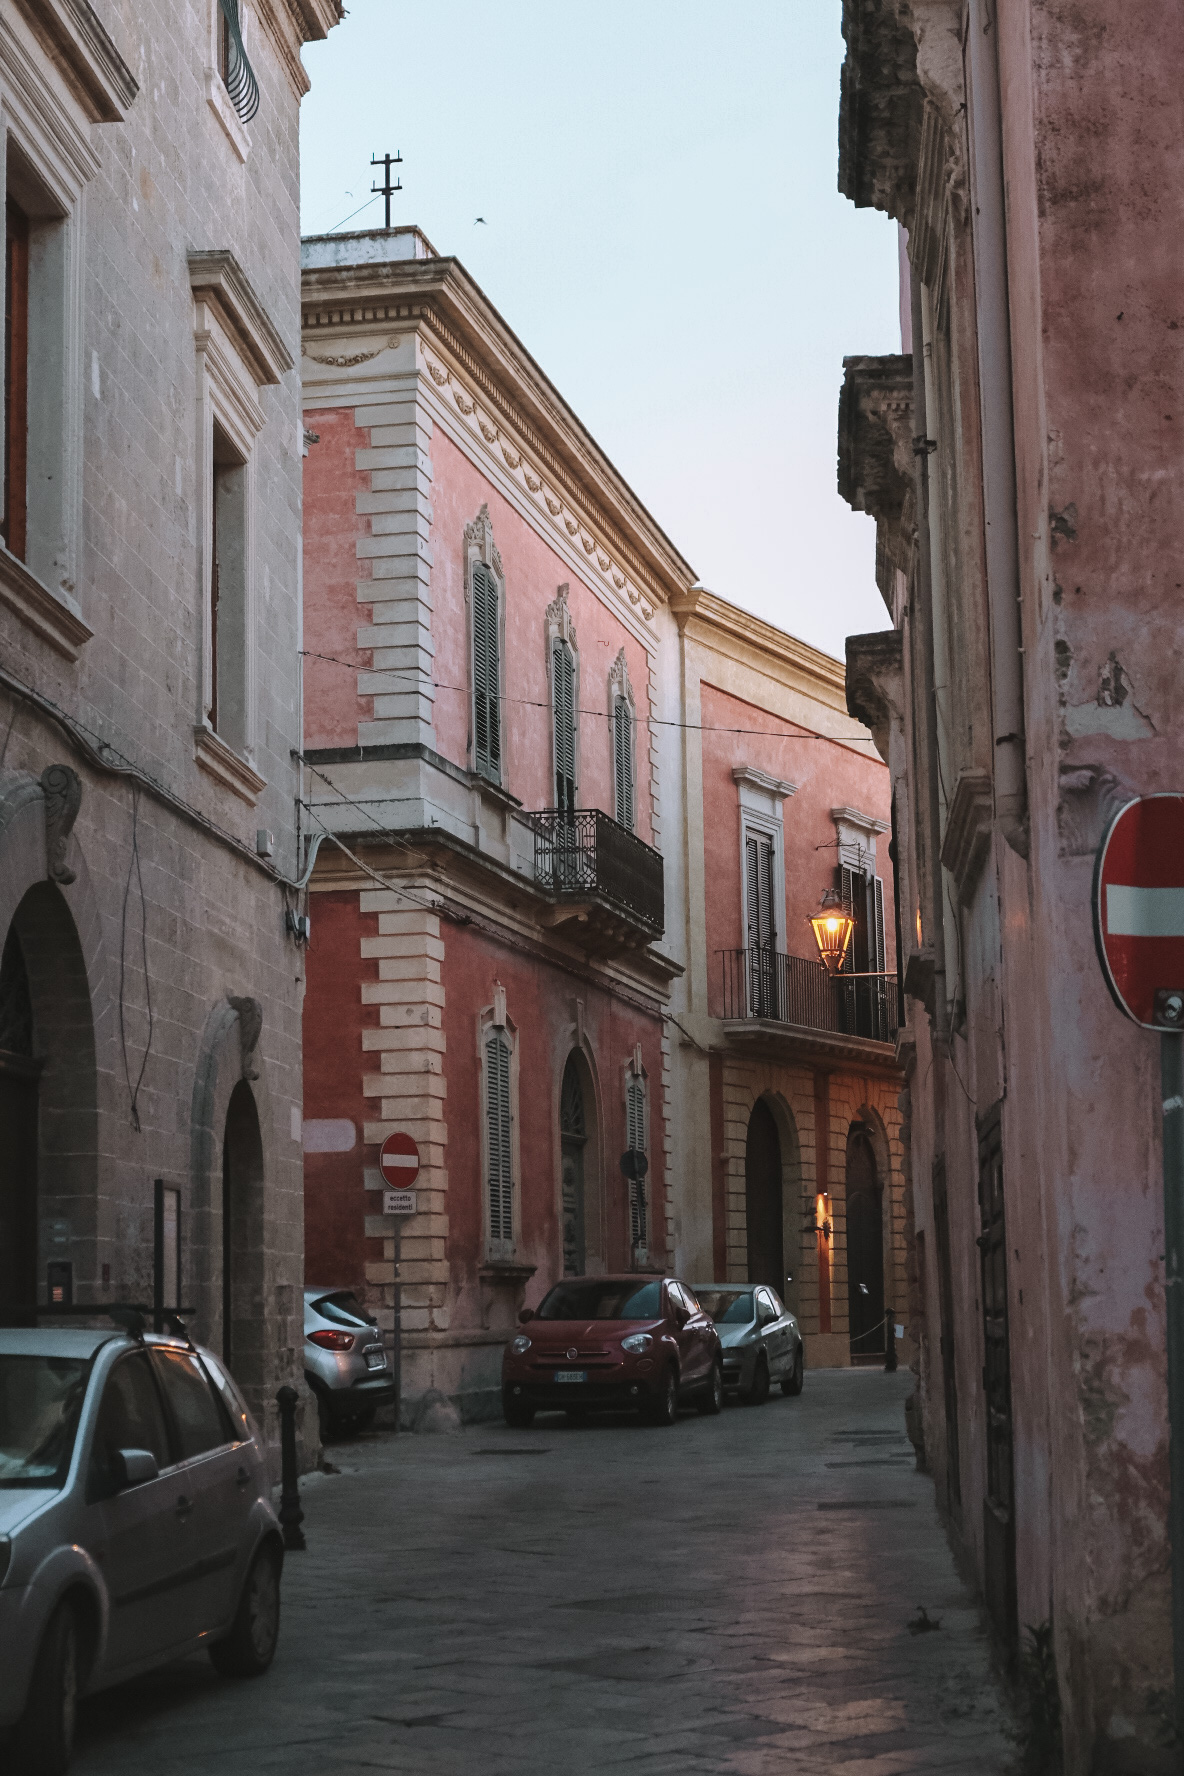 Nardo offers an old-town charm with fewer tourists